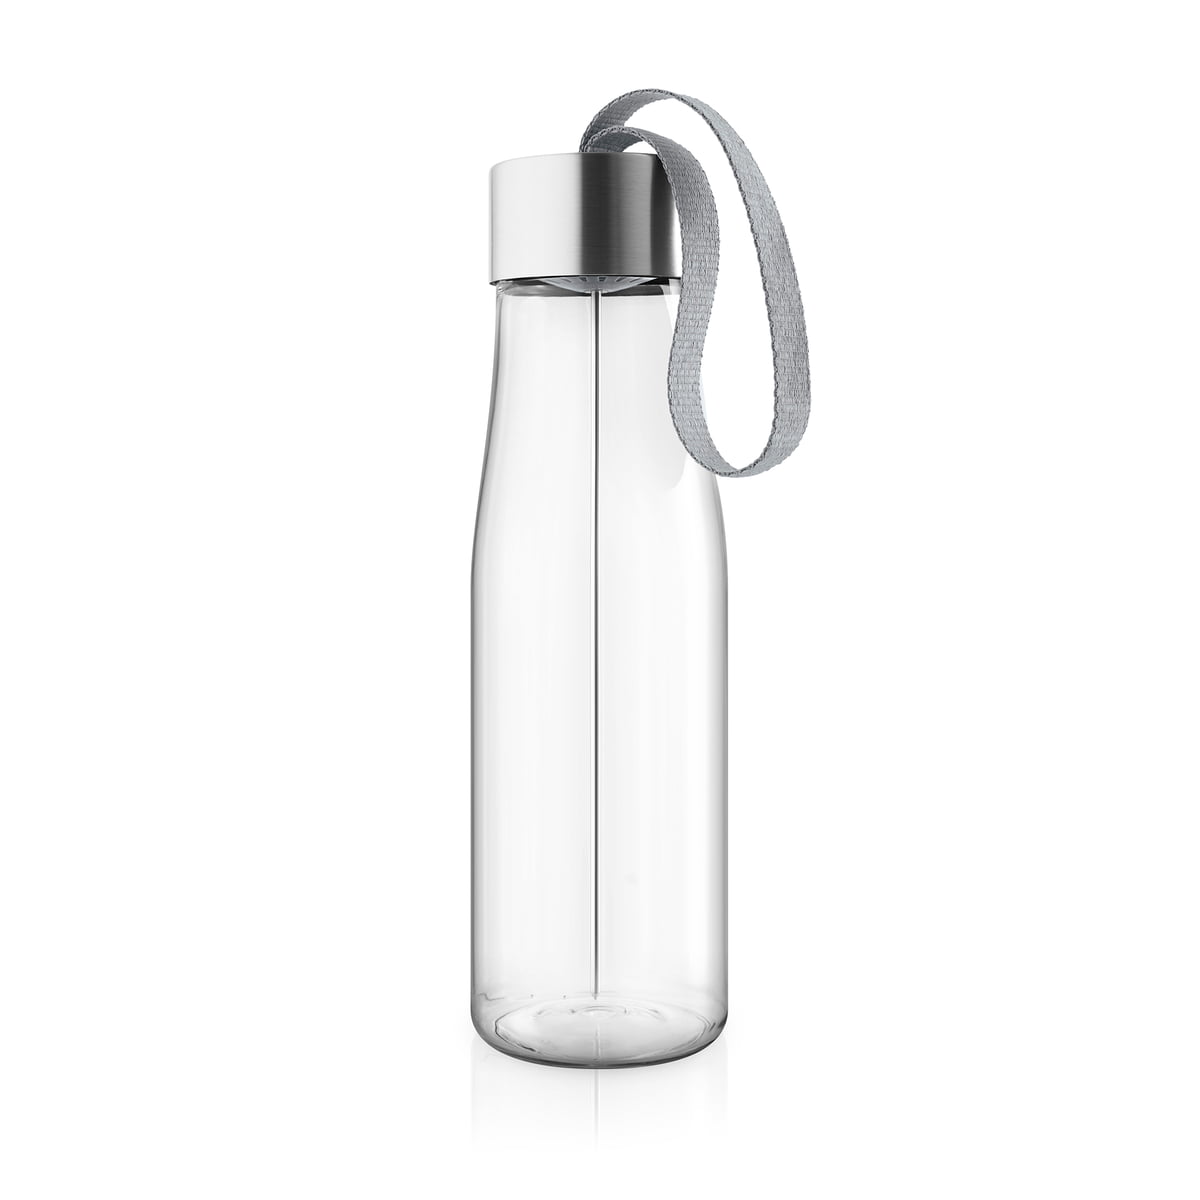 Eva solo - Myflavour water bottle